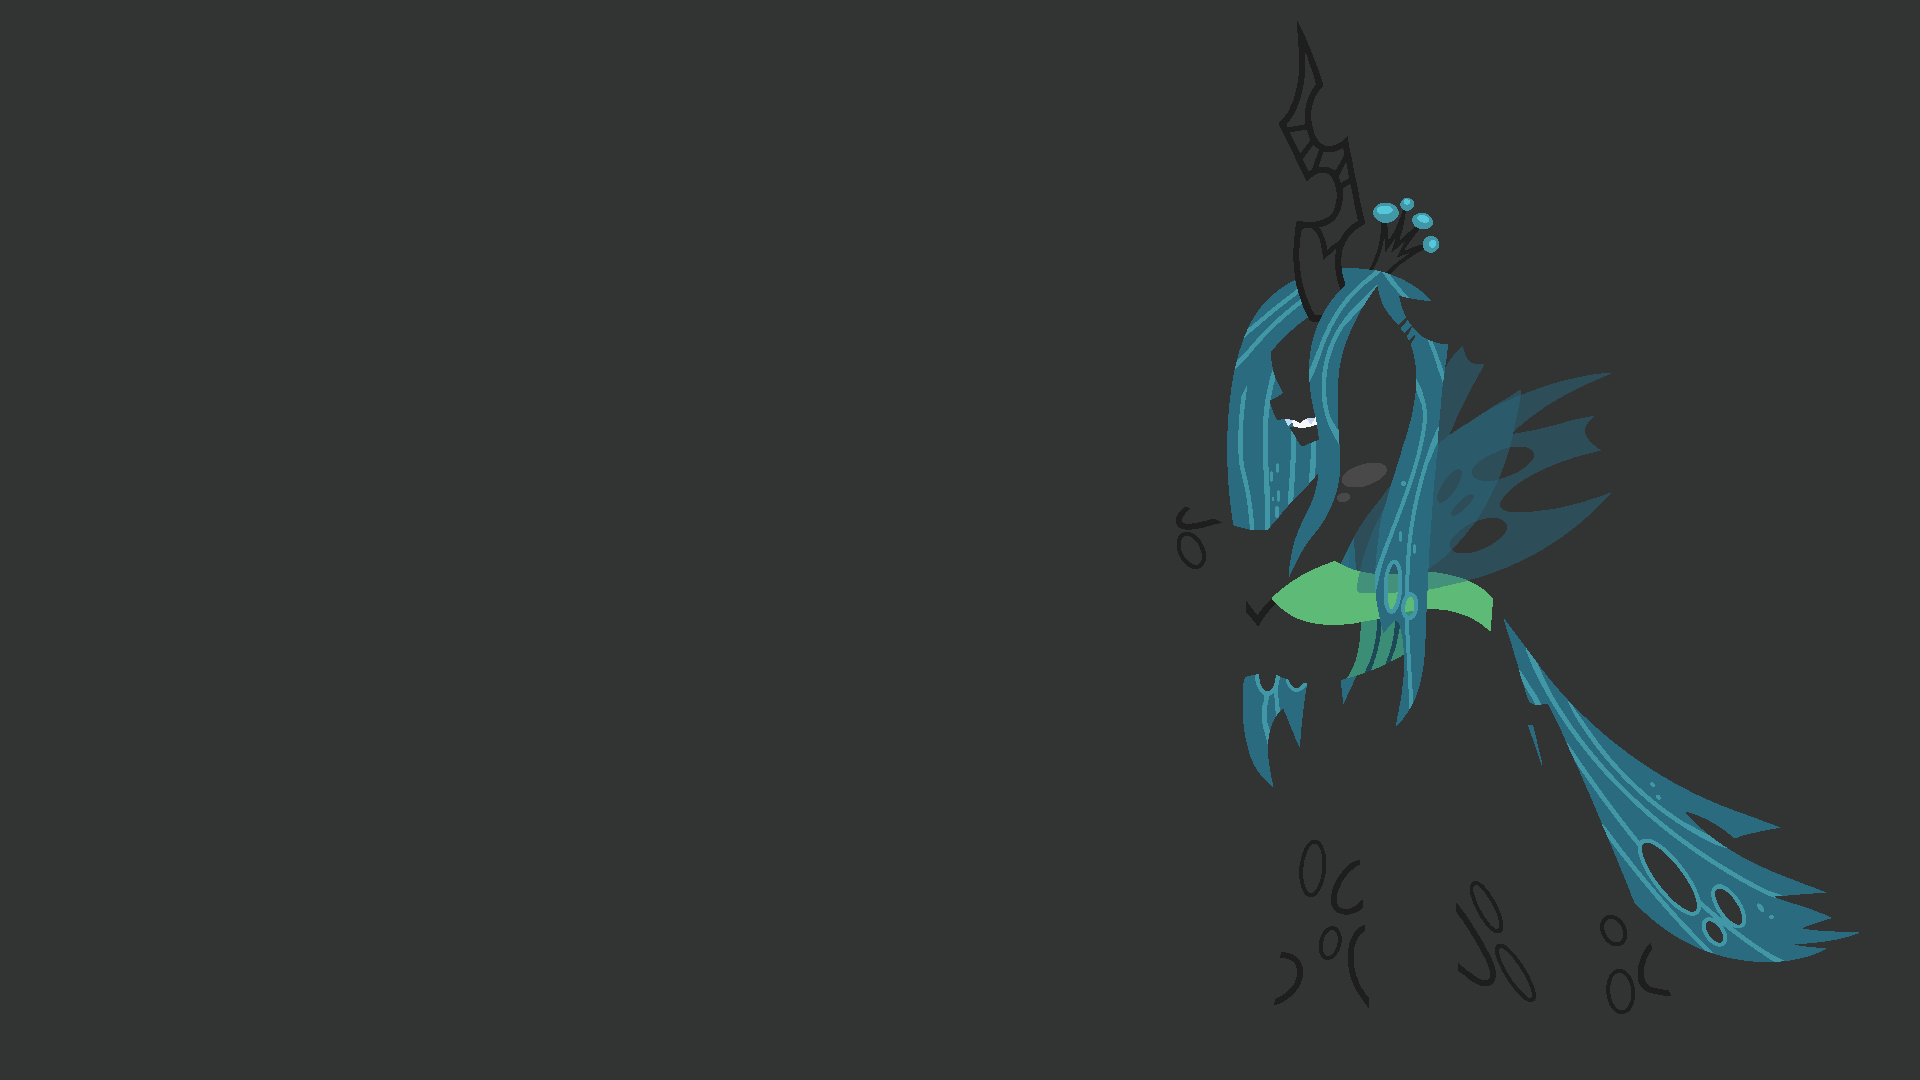 Queen Chrysalis Minimalistic Wallpaper by Kitana-Coldfire